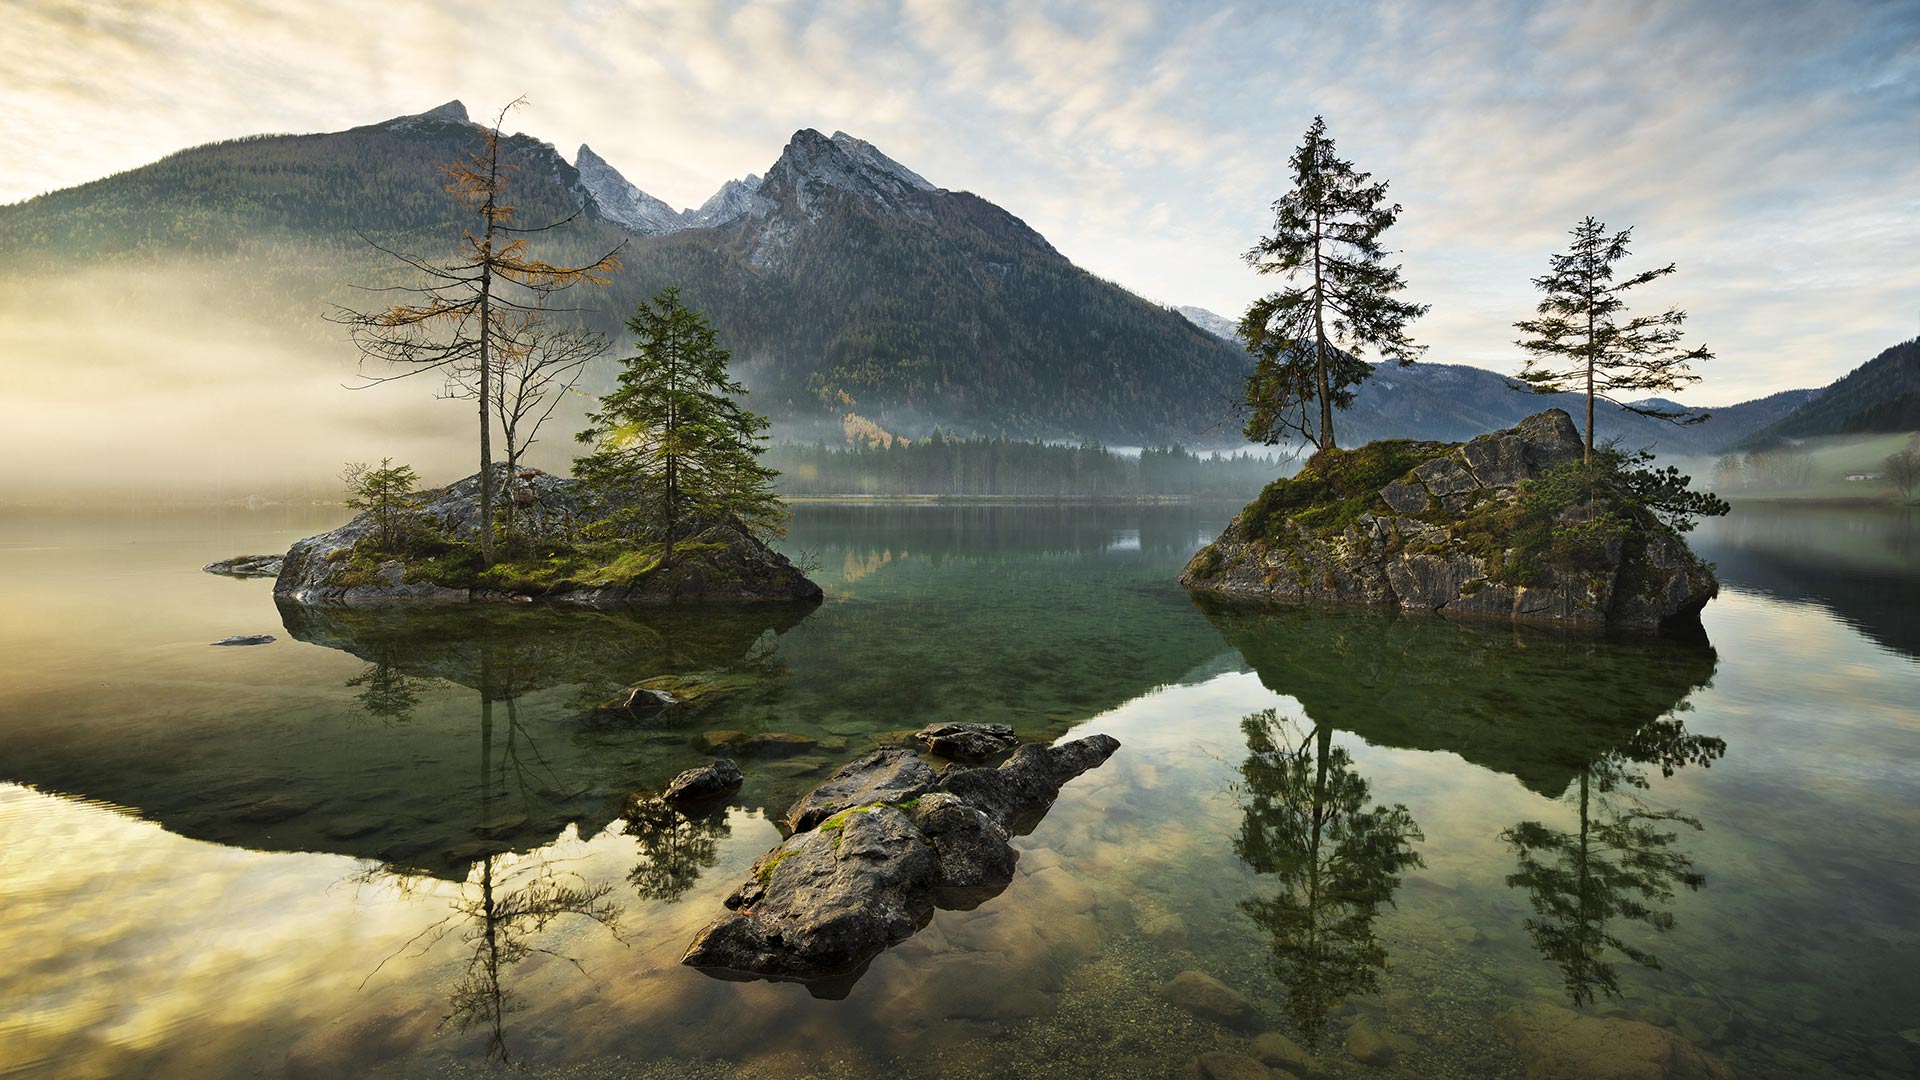 General 1920x1080 landscape nature lake clear water reflection rocks trees mountains mist sky clouds Bing